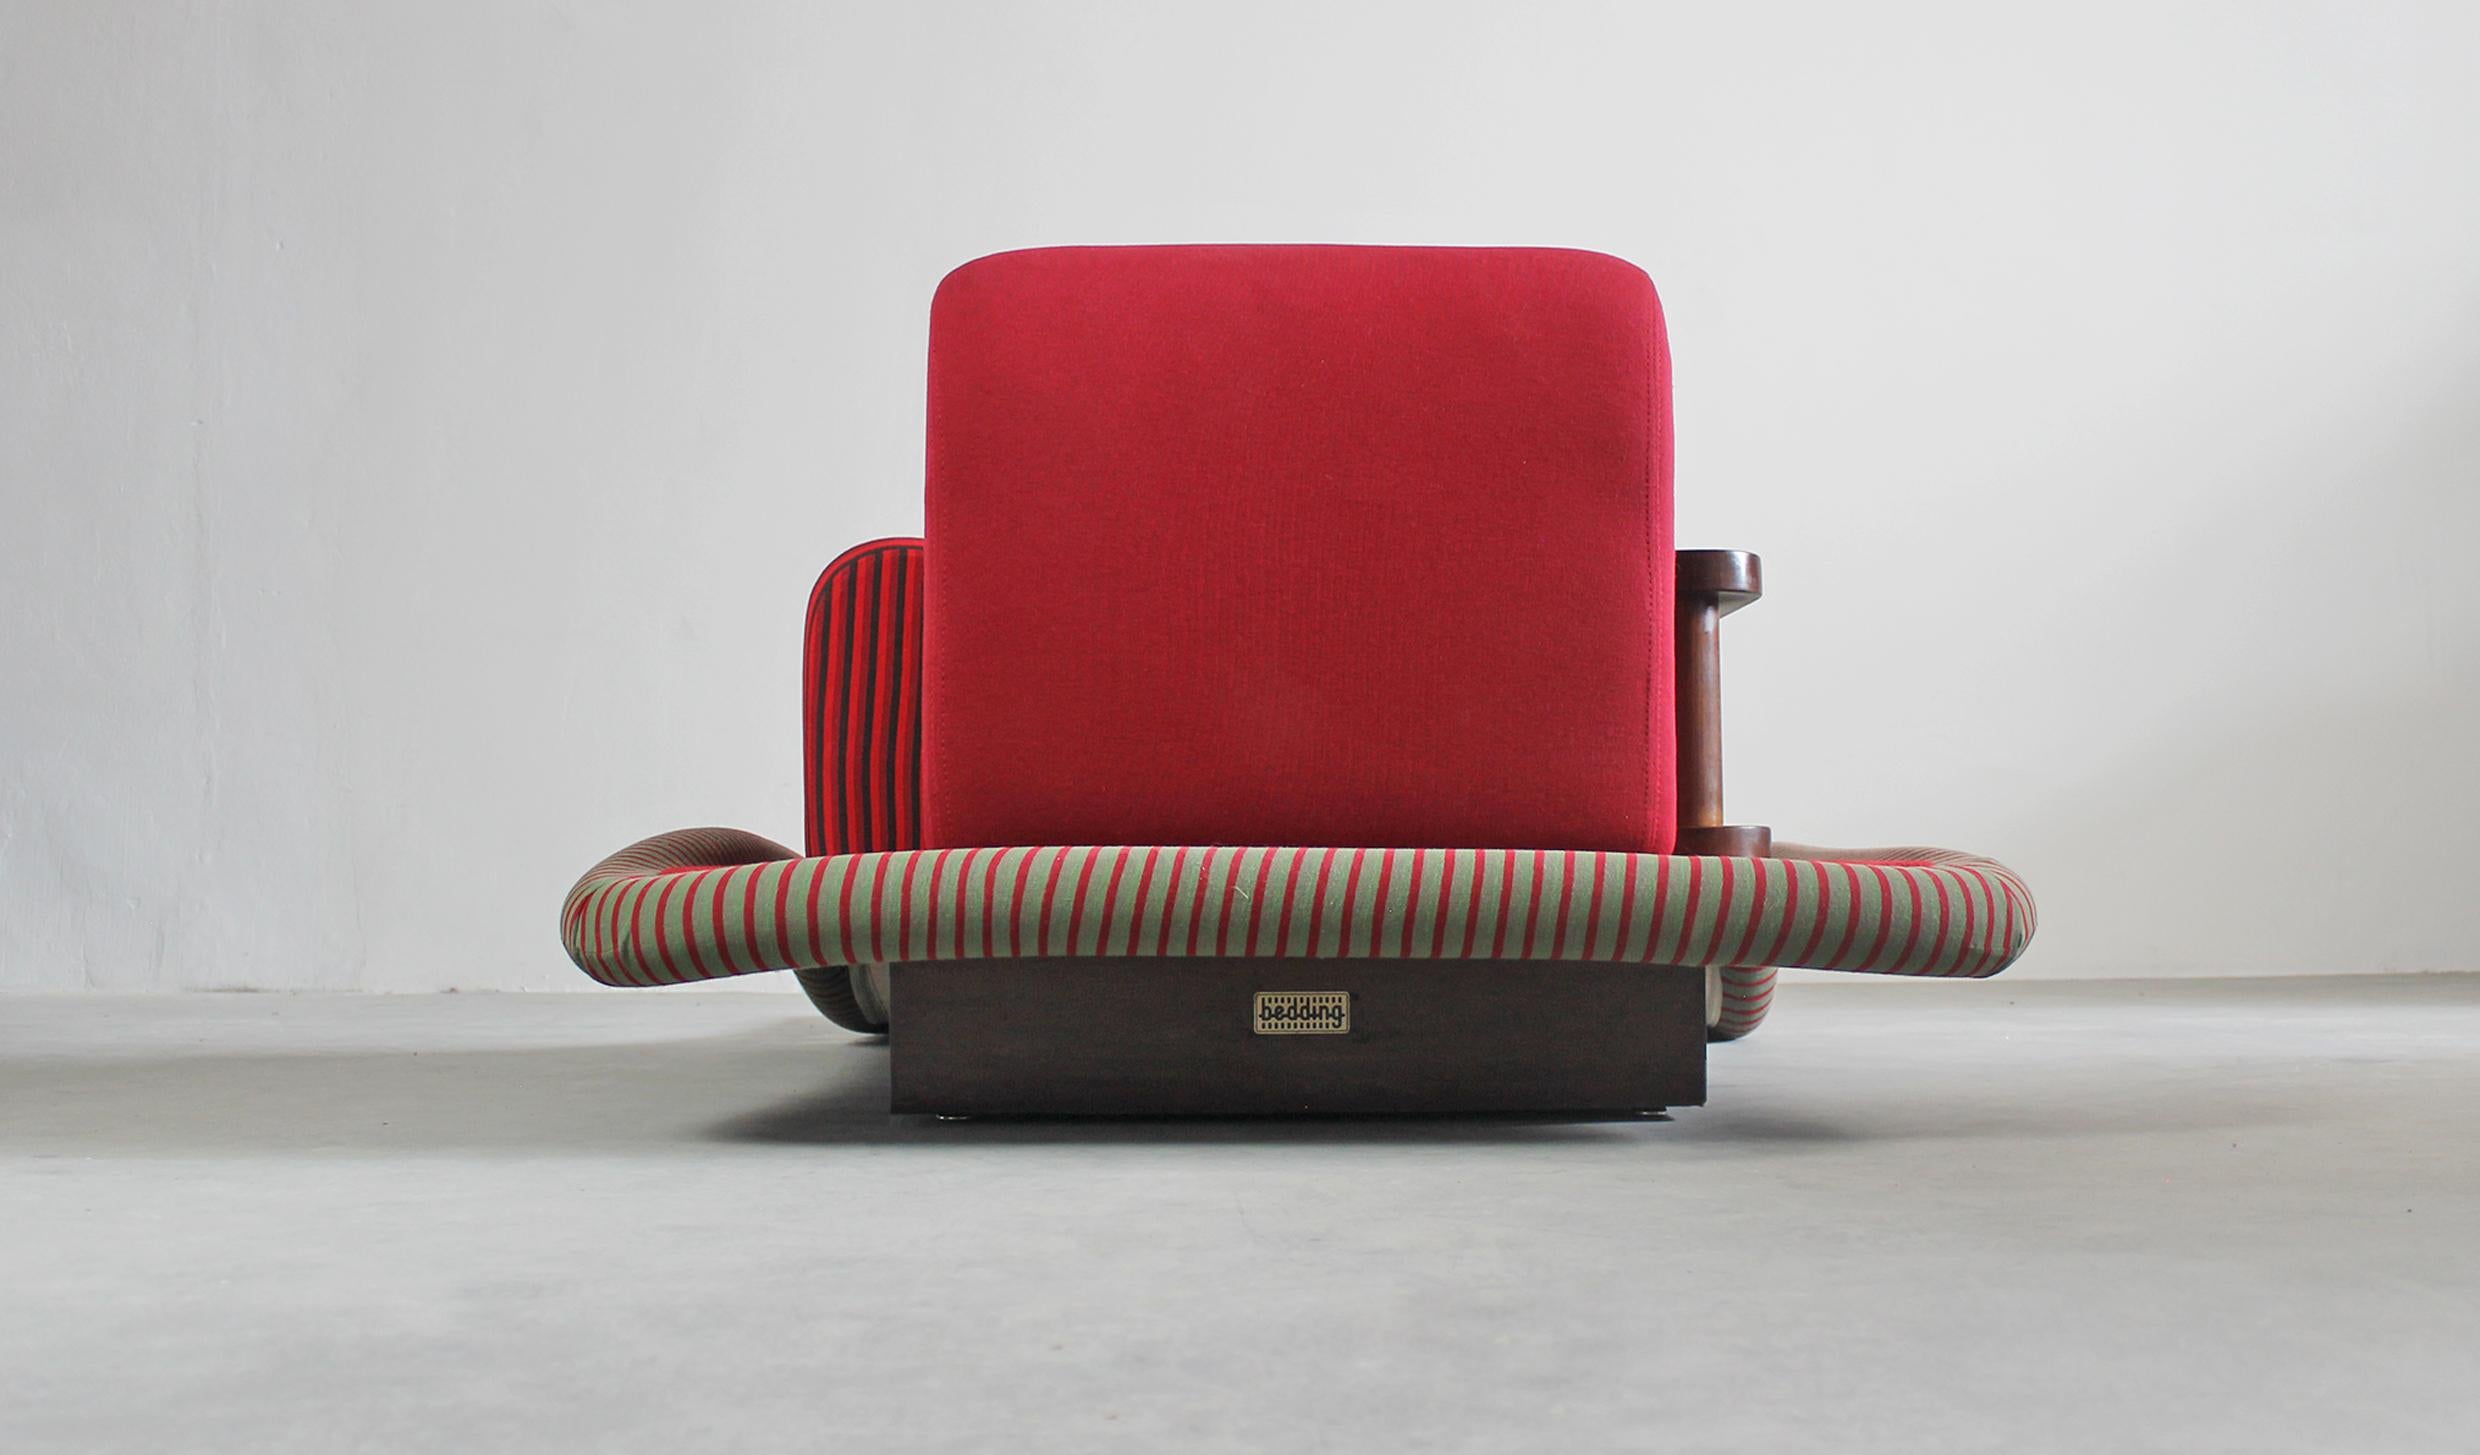 Other Ettore Sottsass Flying Carpet Armchair by Bedding Brevetti 1970s Italy For Sale